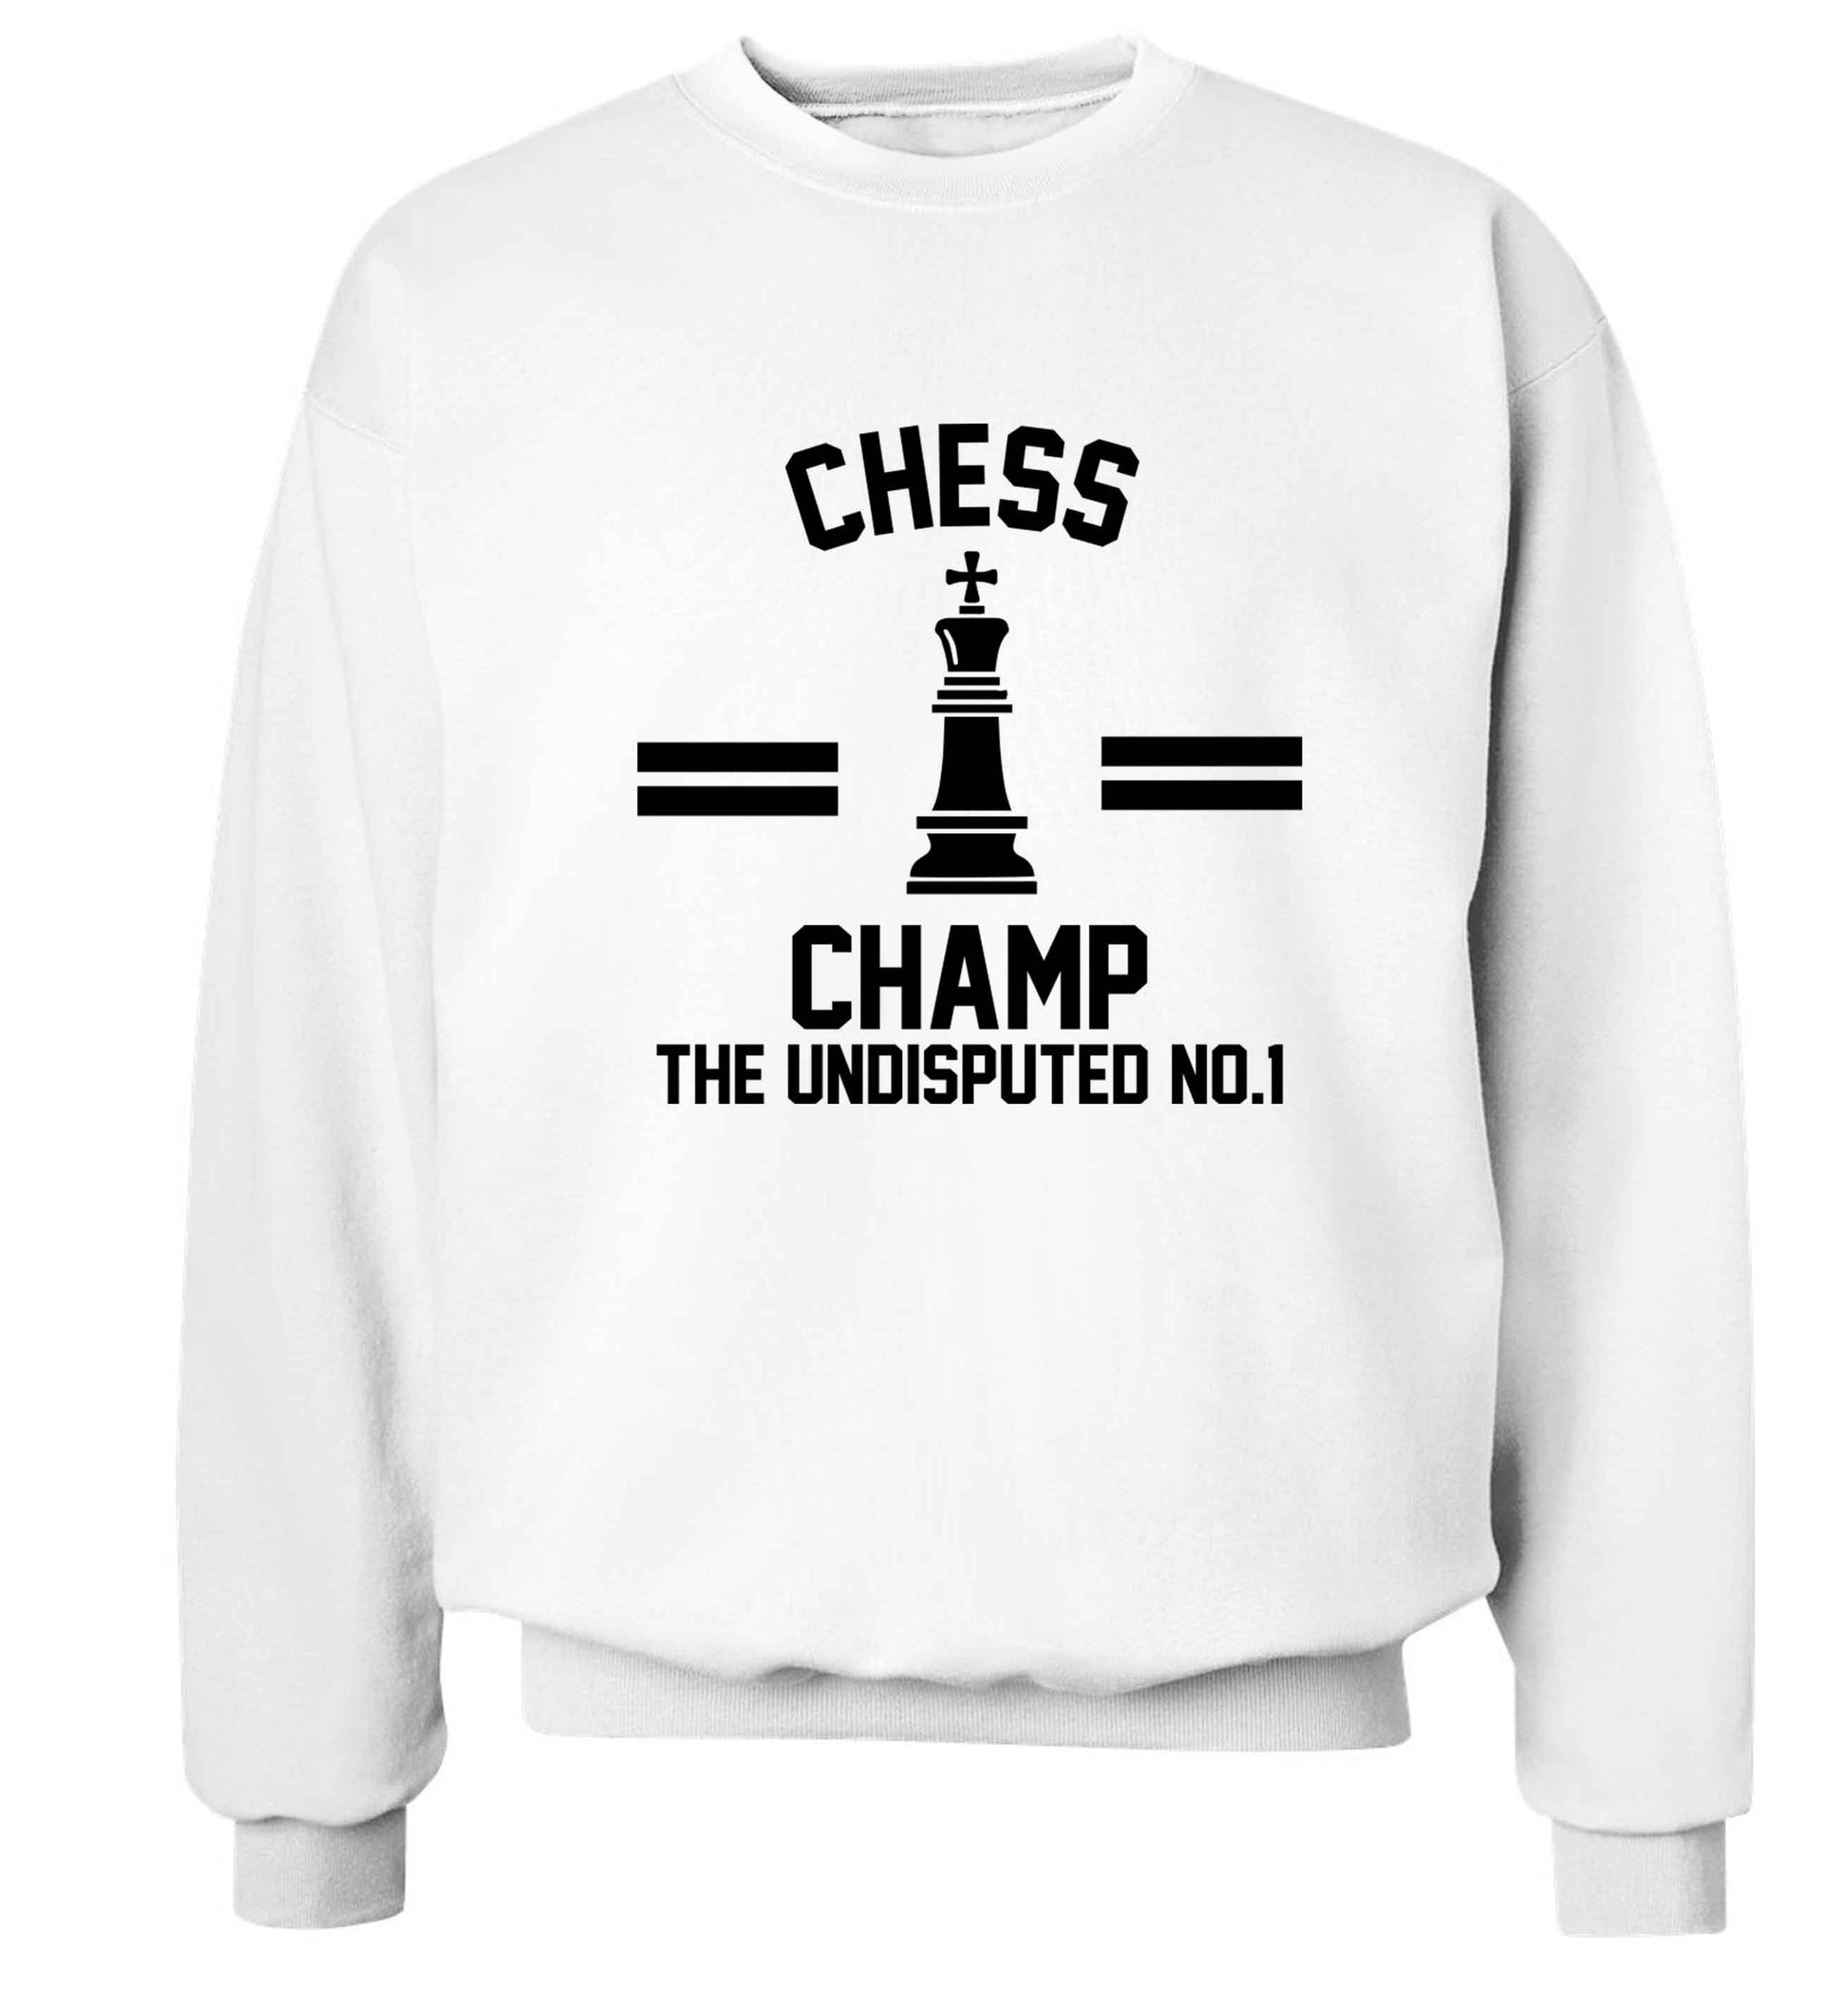 Undisputed chess championship no.1  Adult's unisex white Sweater 2XL